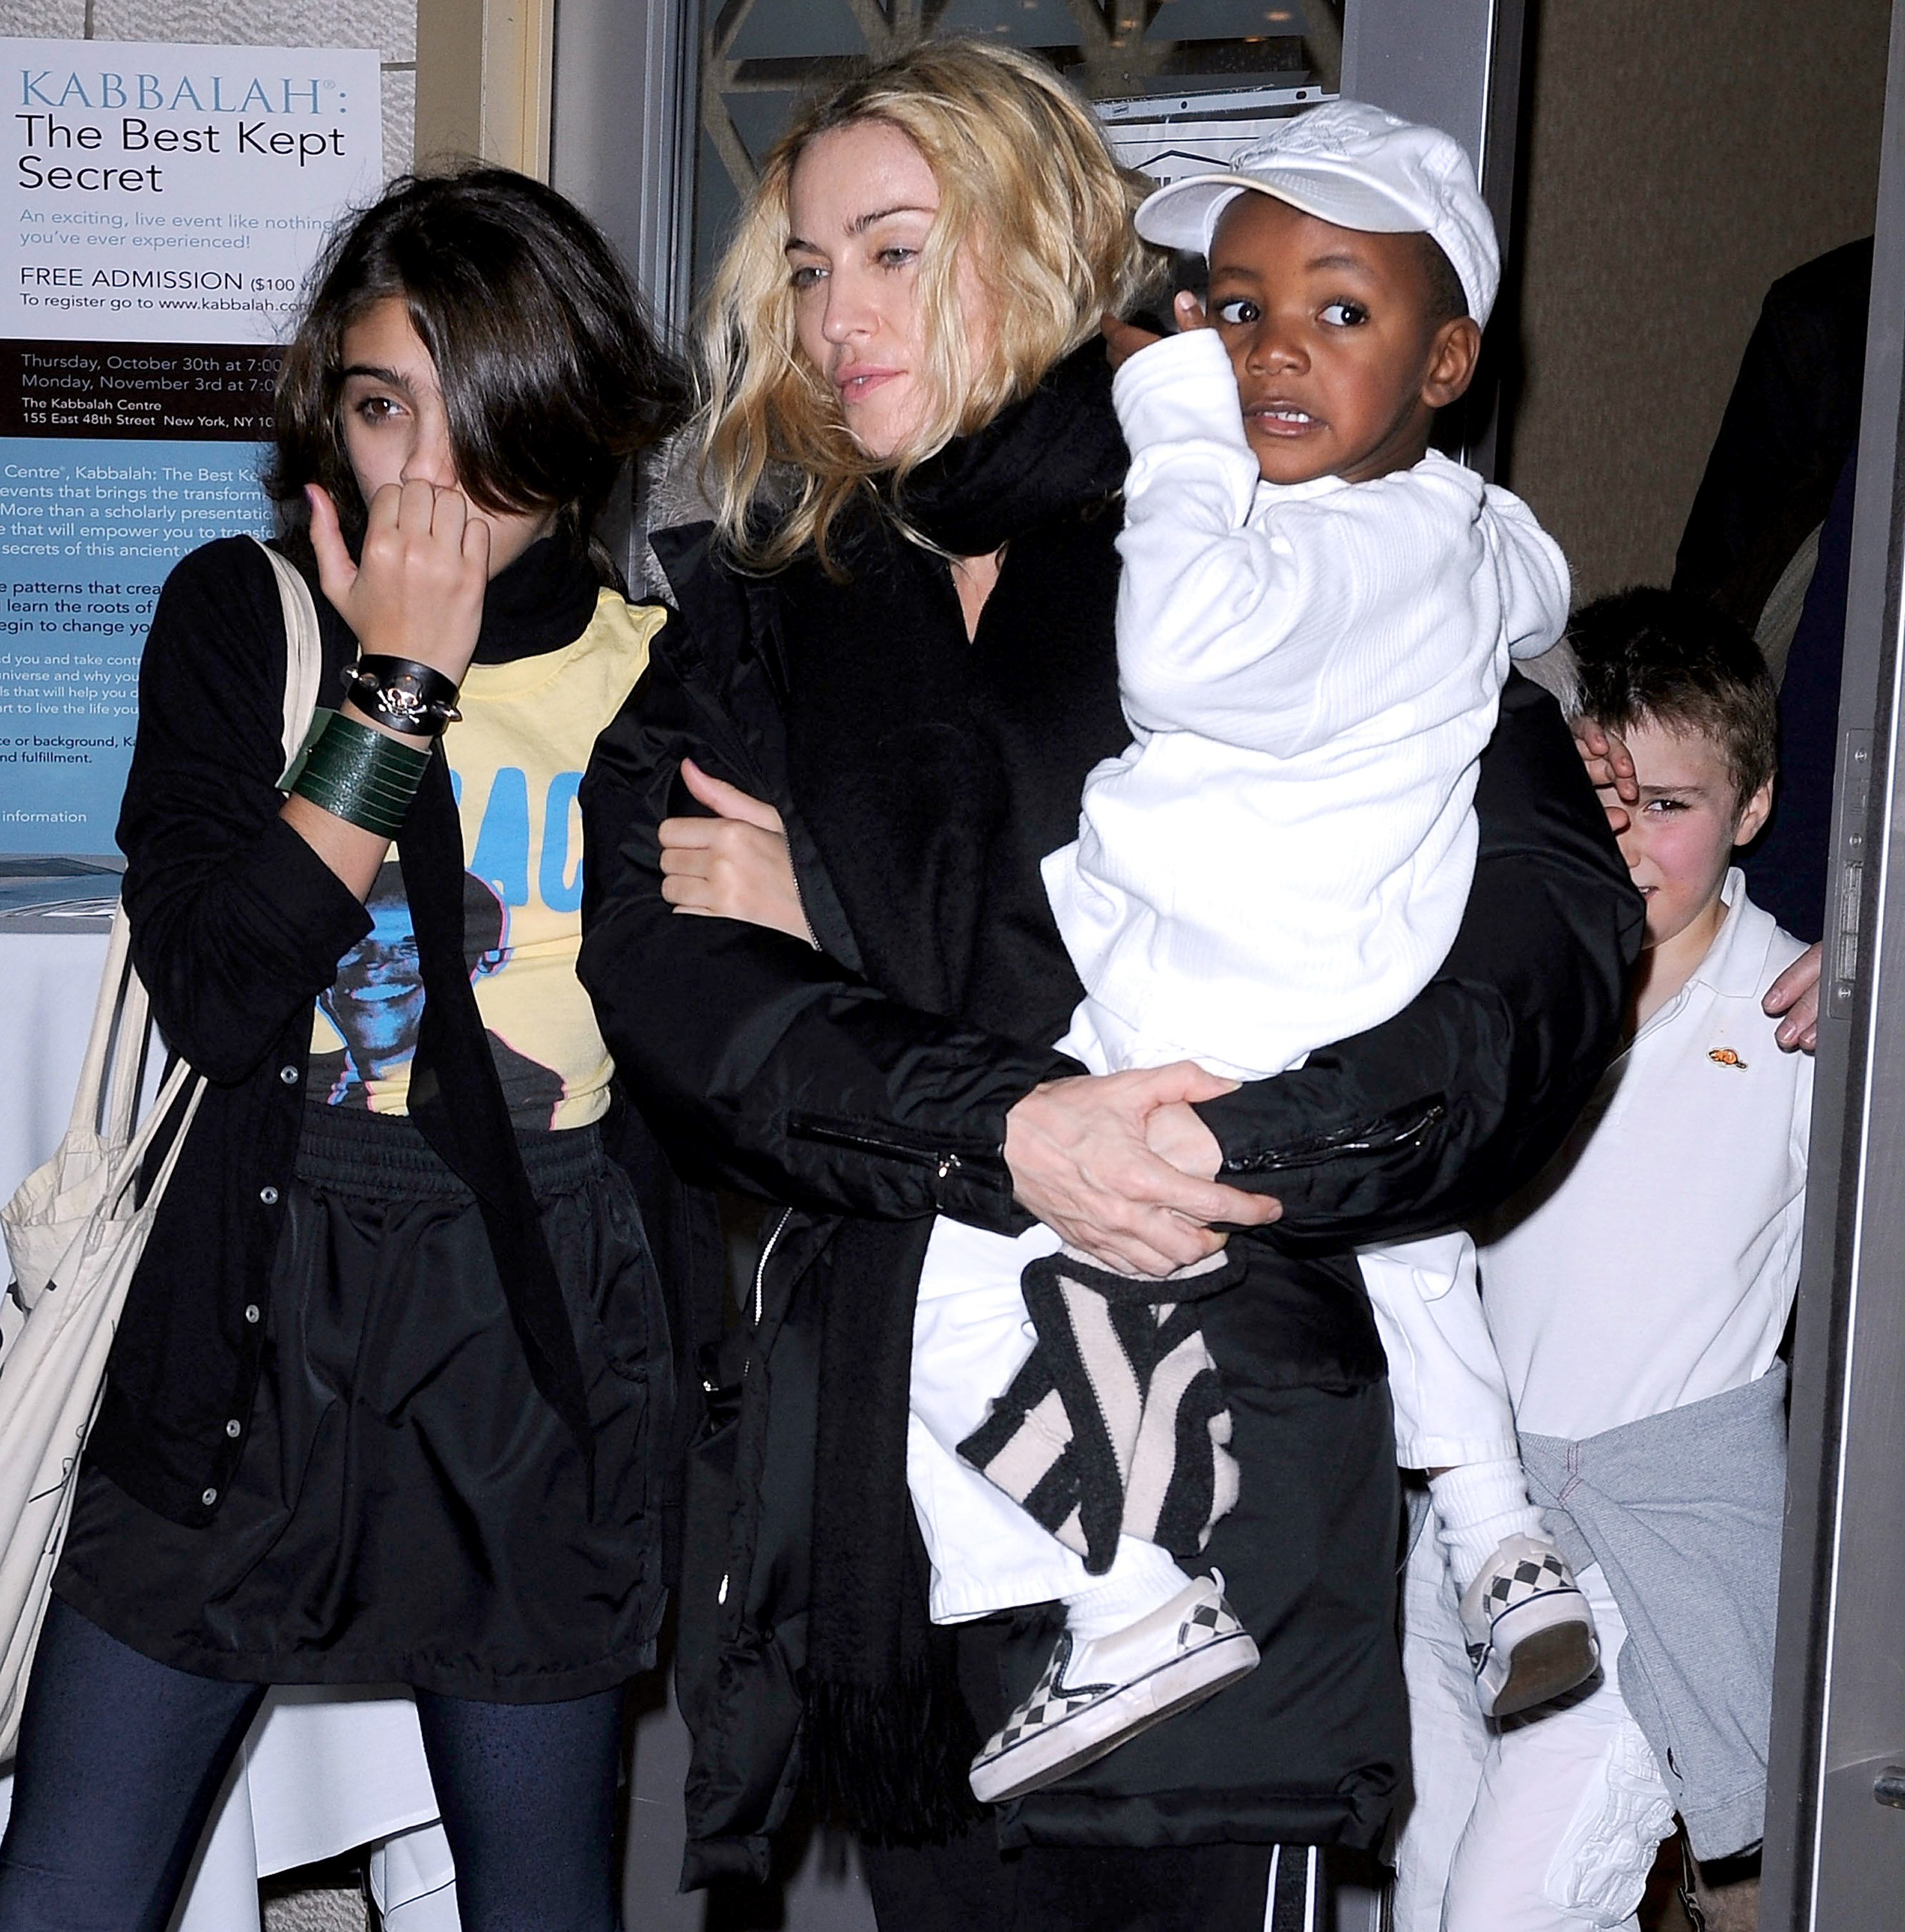 Madonna with her children Lourdes "Lola" Leon, David Banda, and Rocco Ritchie on October 24, 2008 in New York City | Source: Getty Images